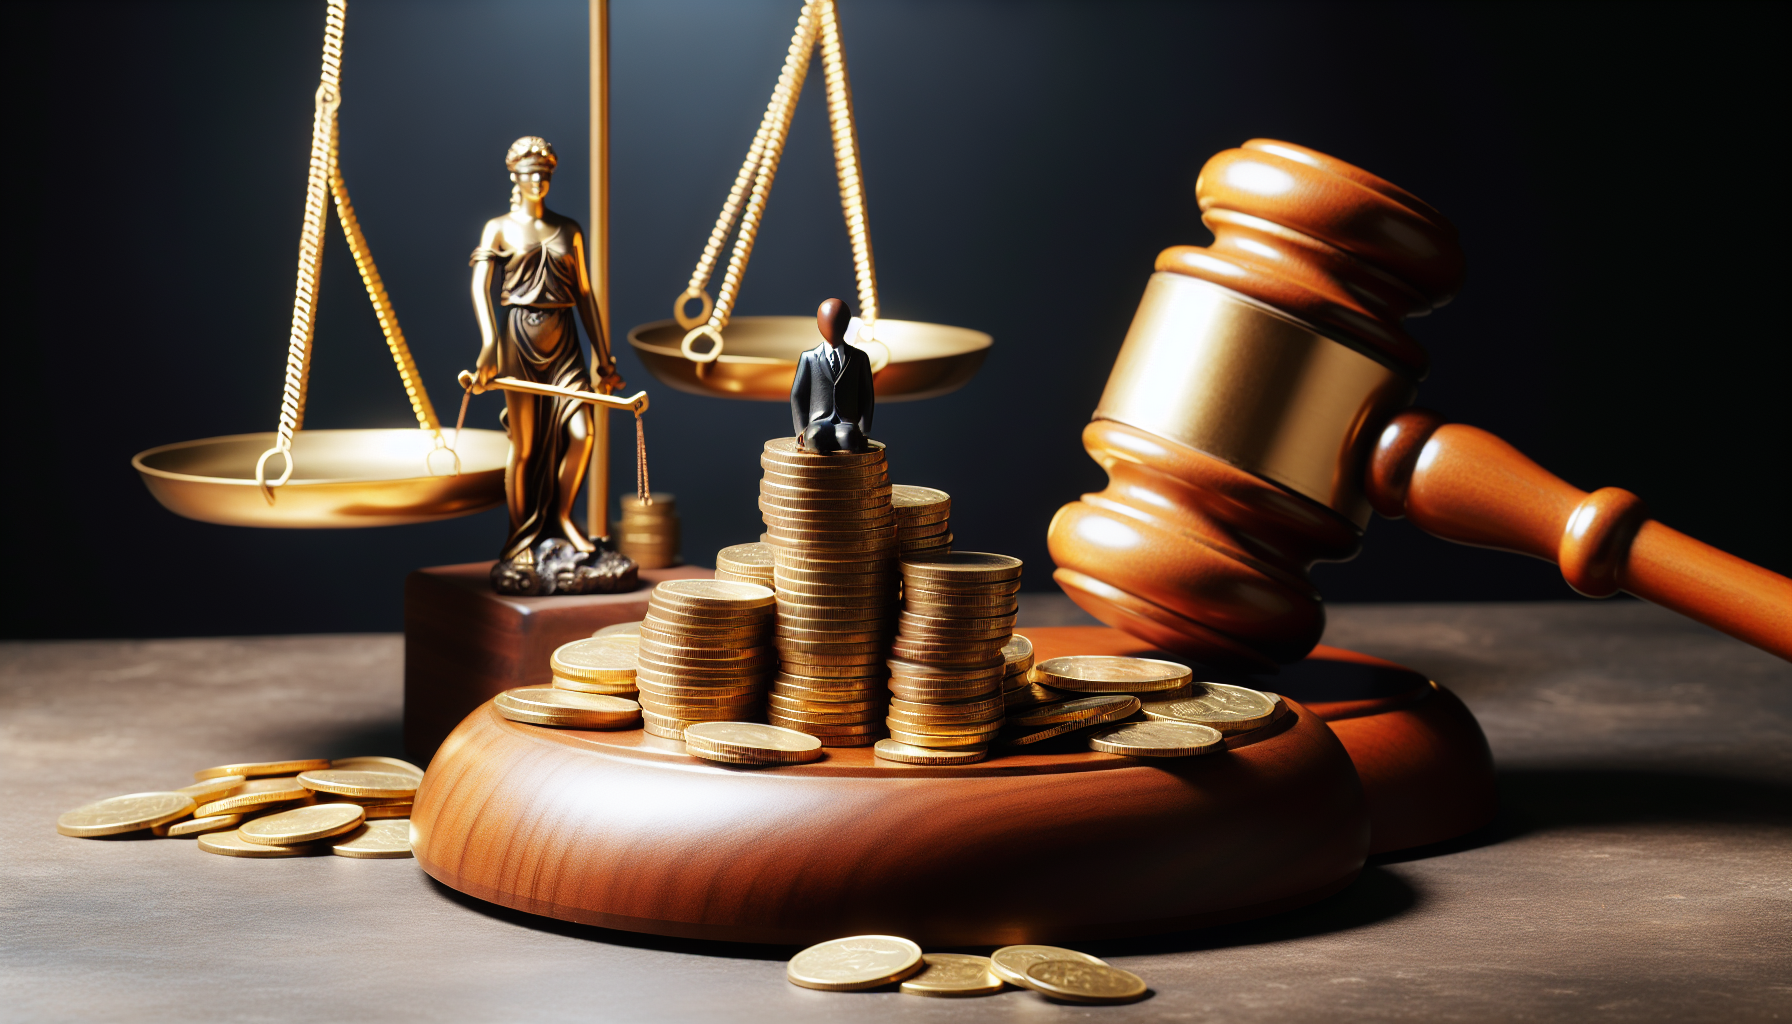 Illustration of financial compensation and legal gavel